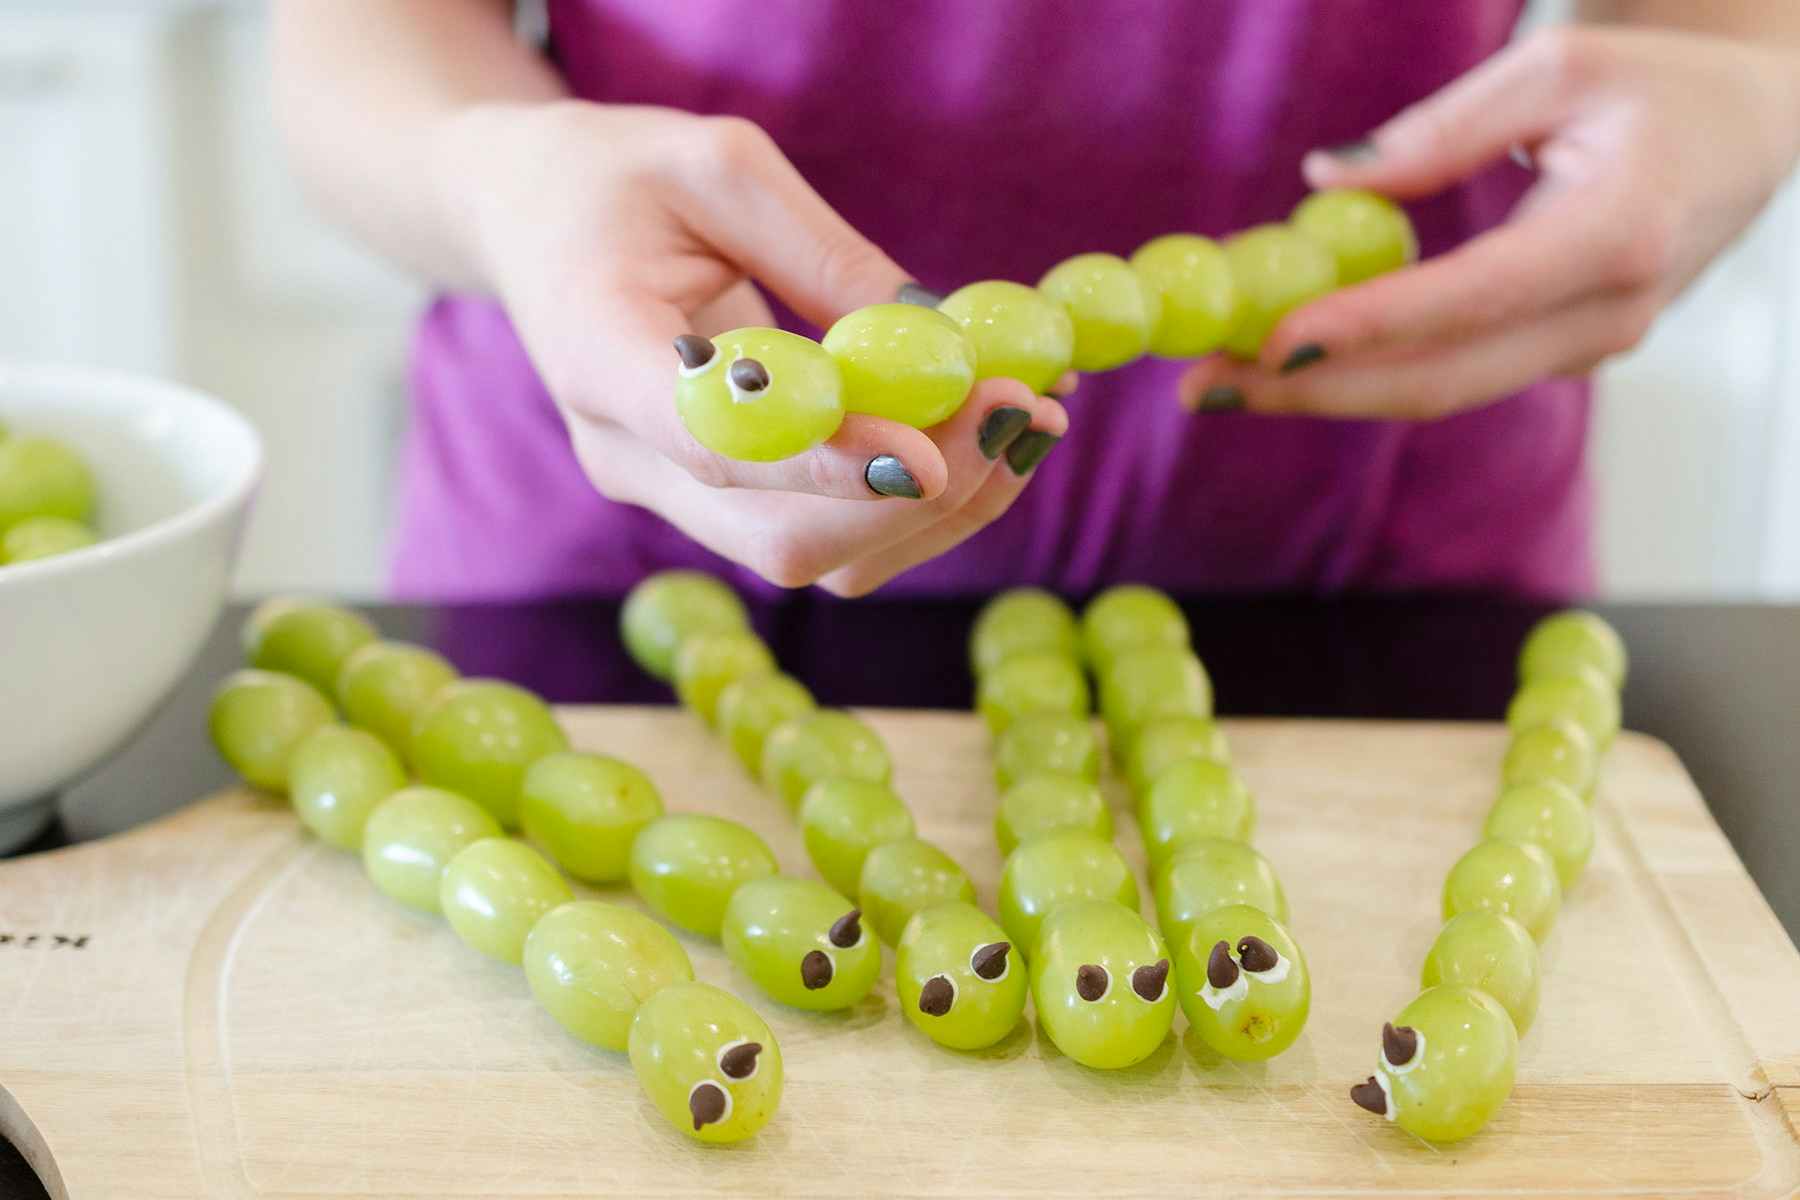 A woman holding a snack made of grapes and chocolate chips to look like a caterpillar.